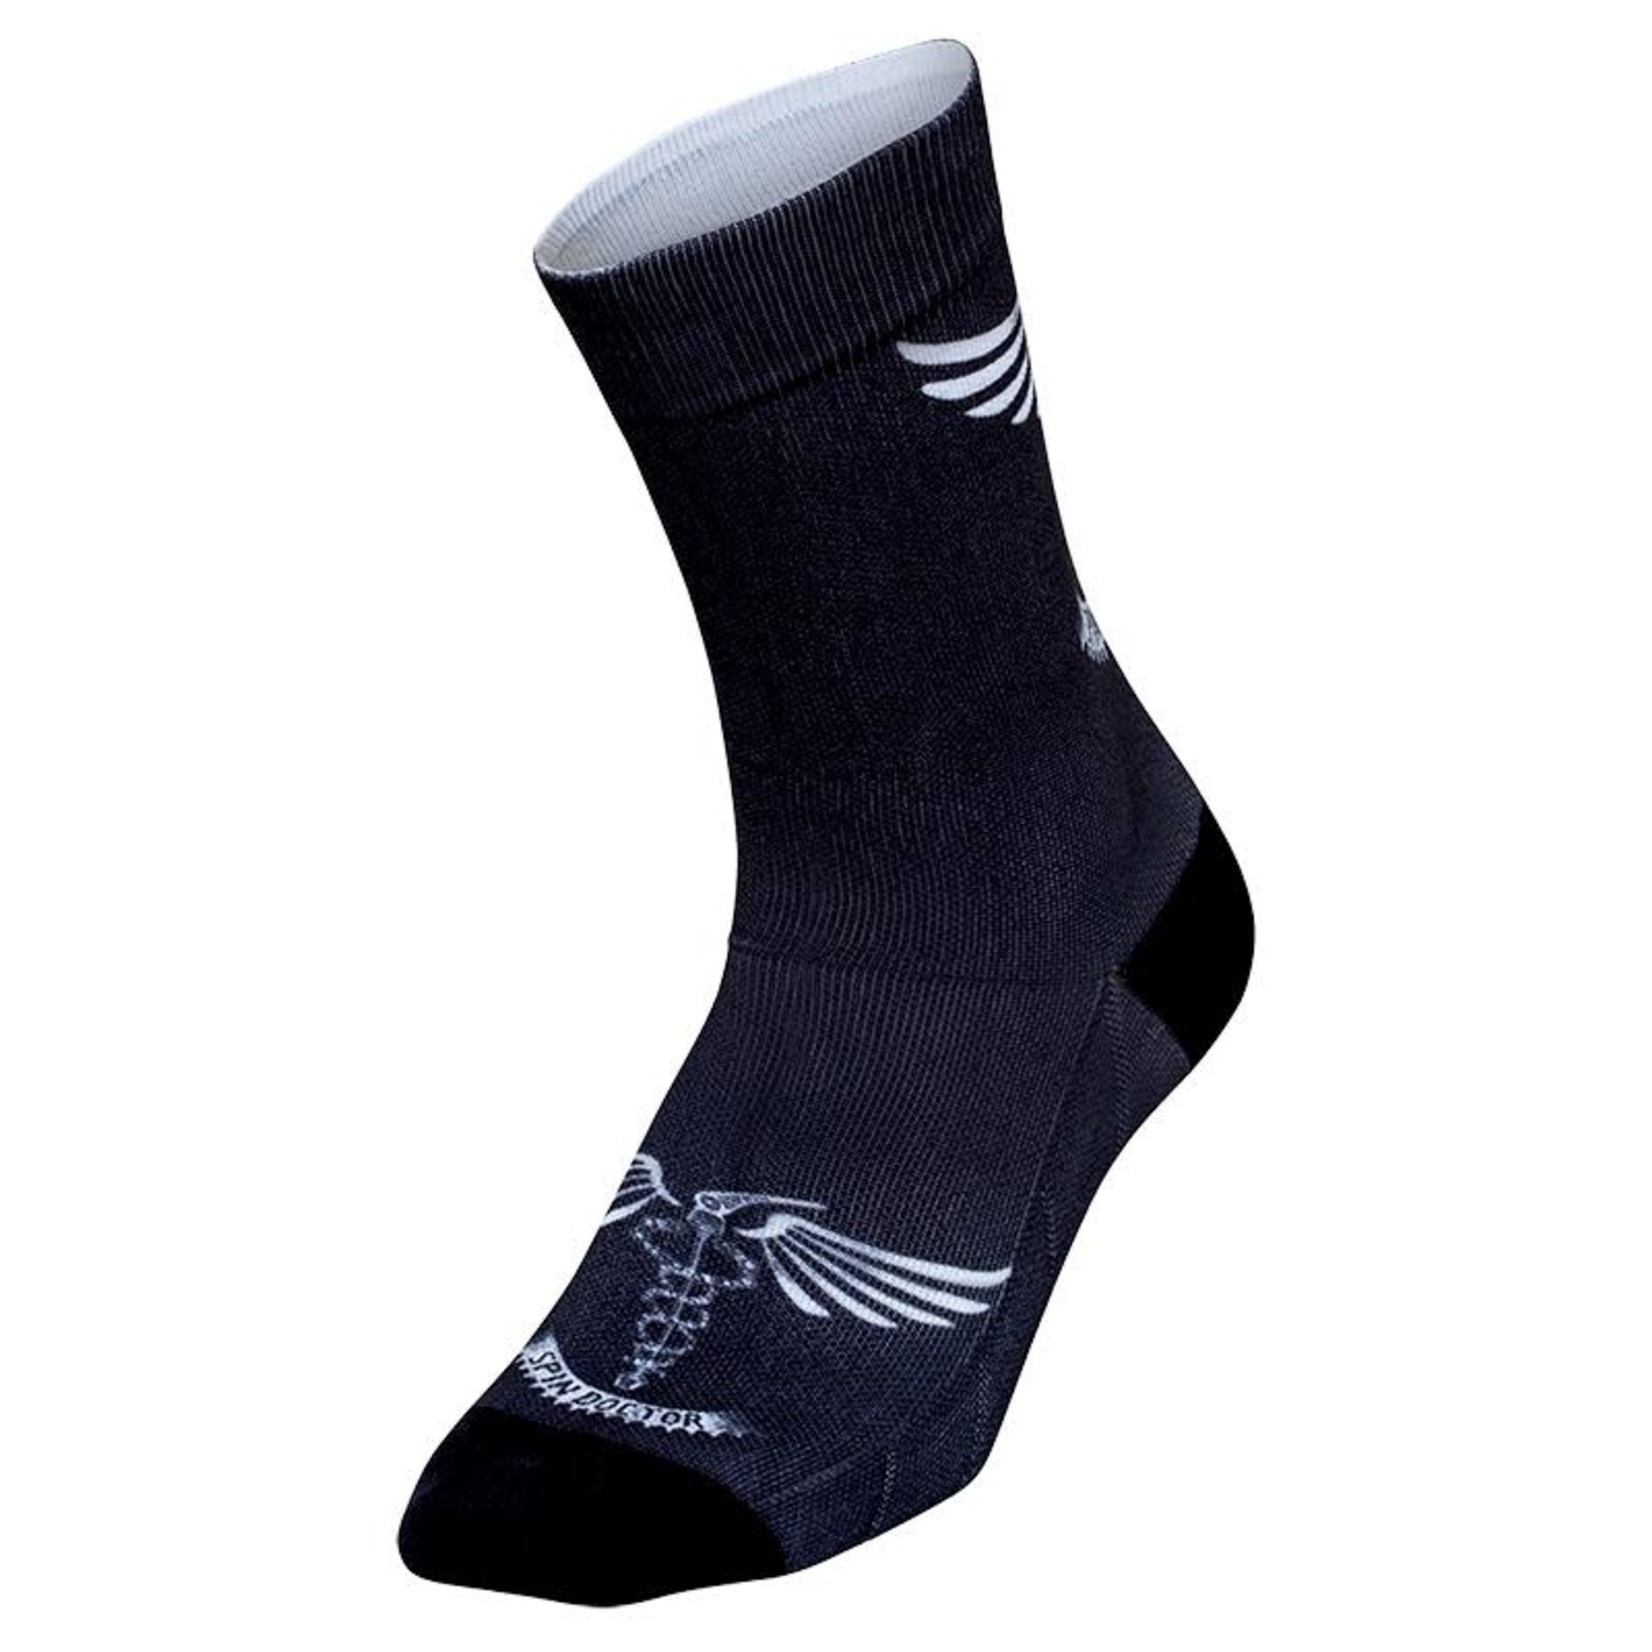 Cycology Spin Doctor Cycling Socks